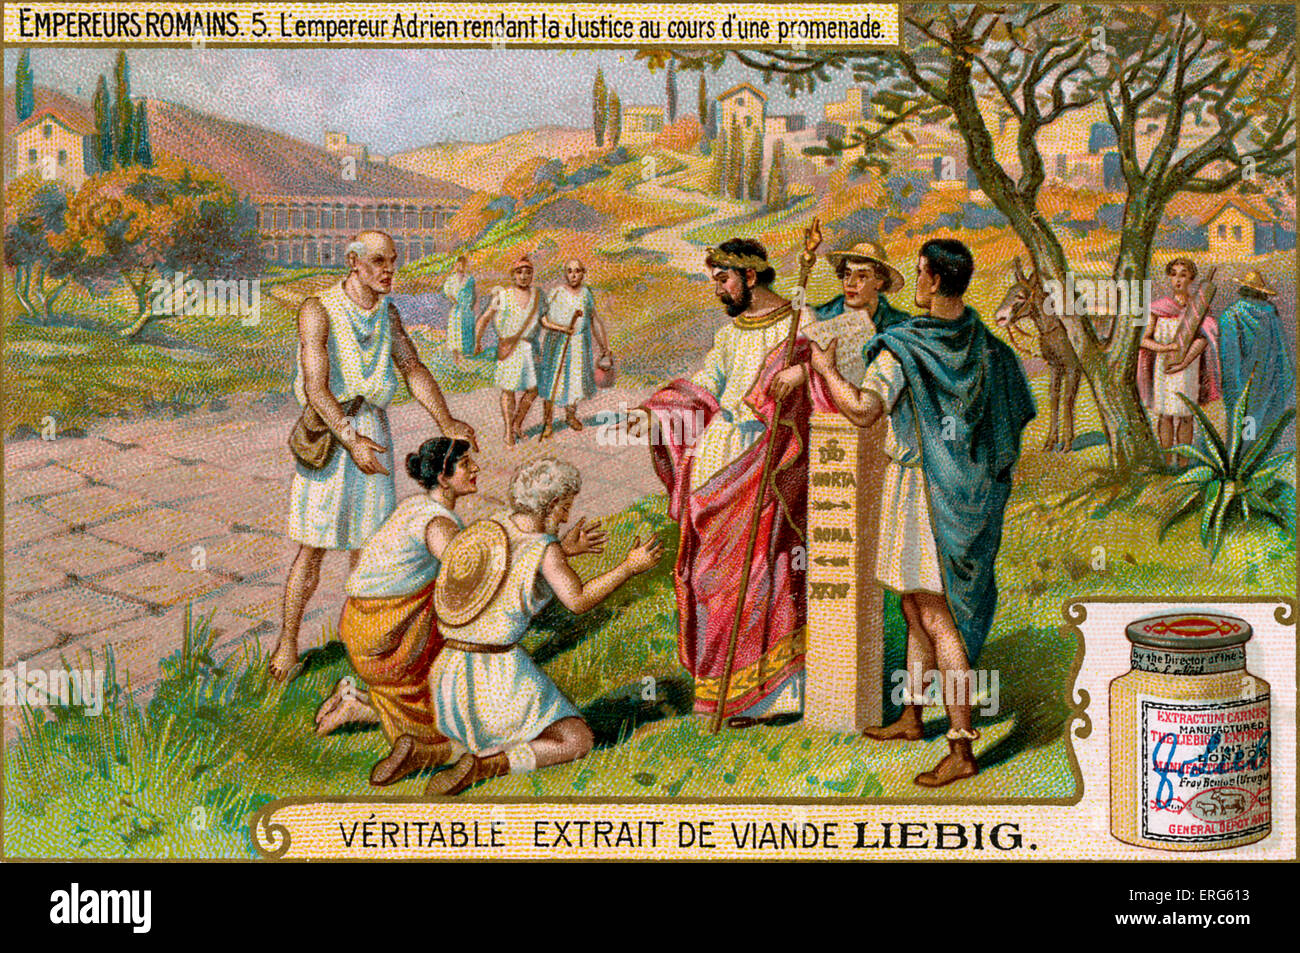 Roman Emperors - Liebig Meat Extract collectible card, 1907. Vignette depicting Hadrian. Caption reads: 'L'empereur Adrien Stock Photo